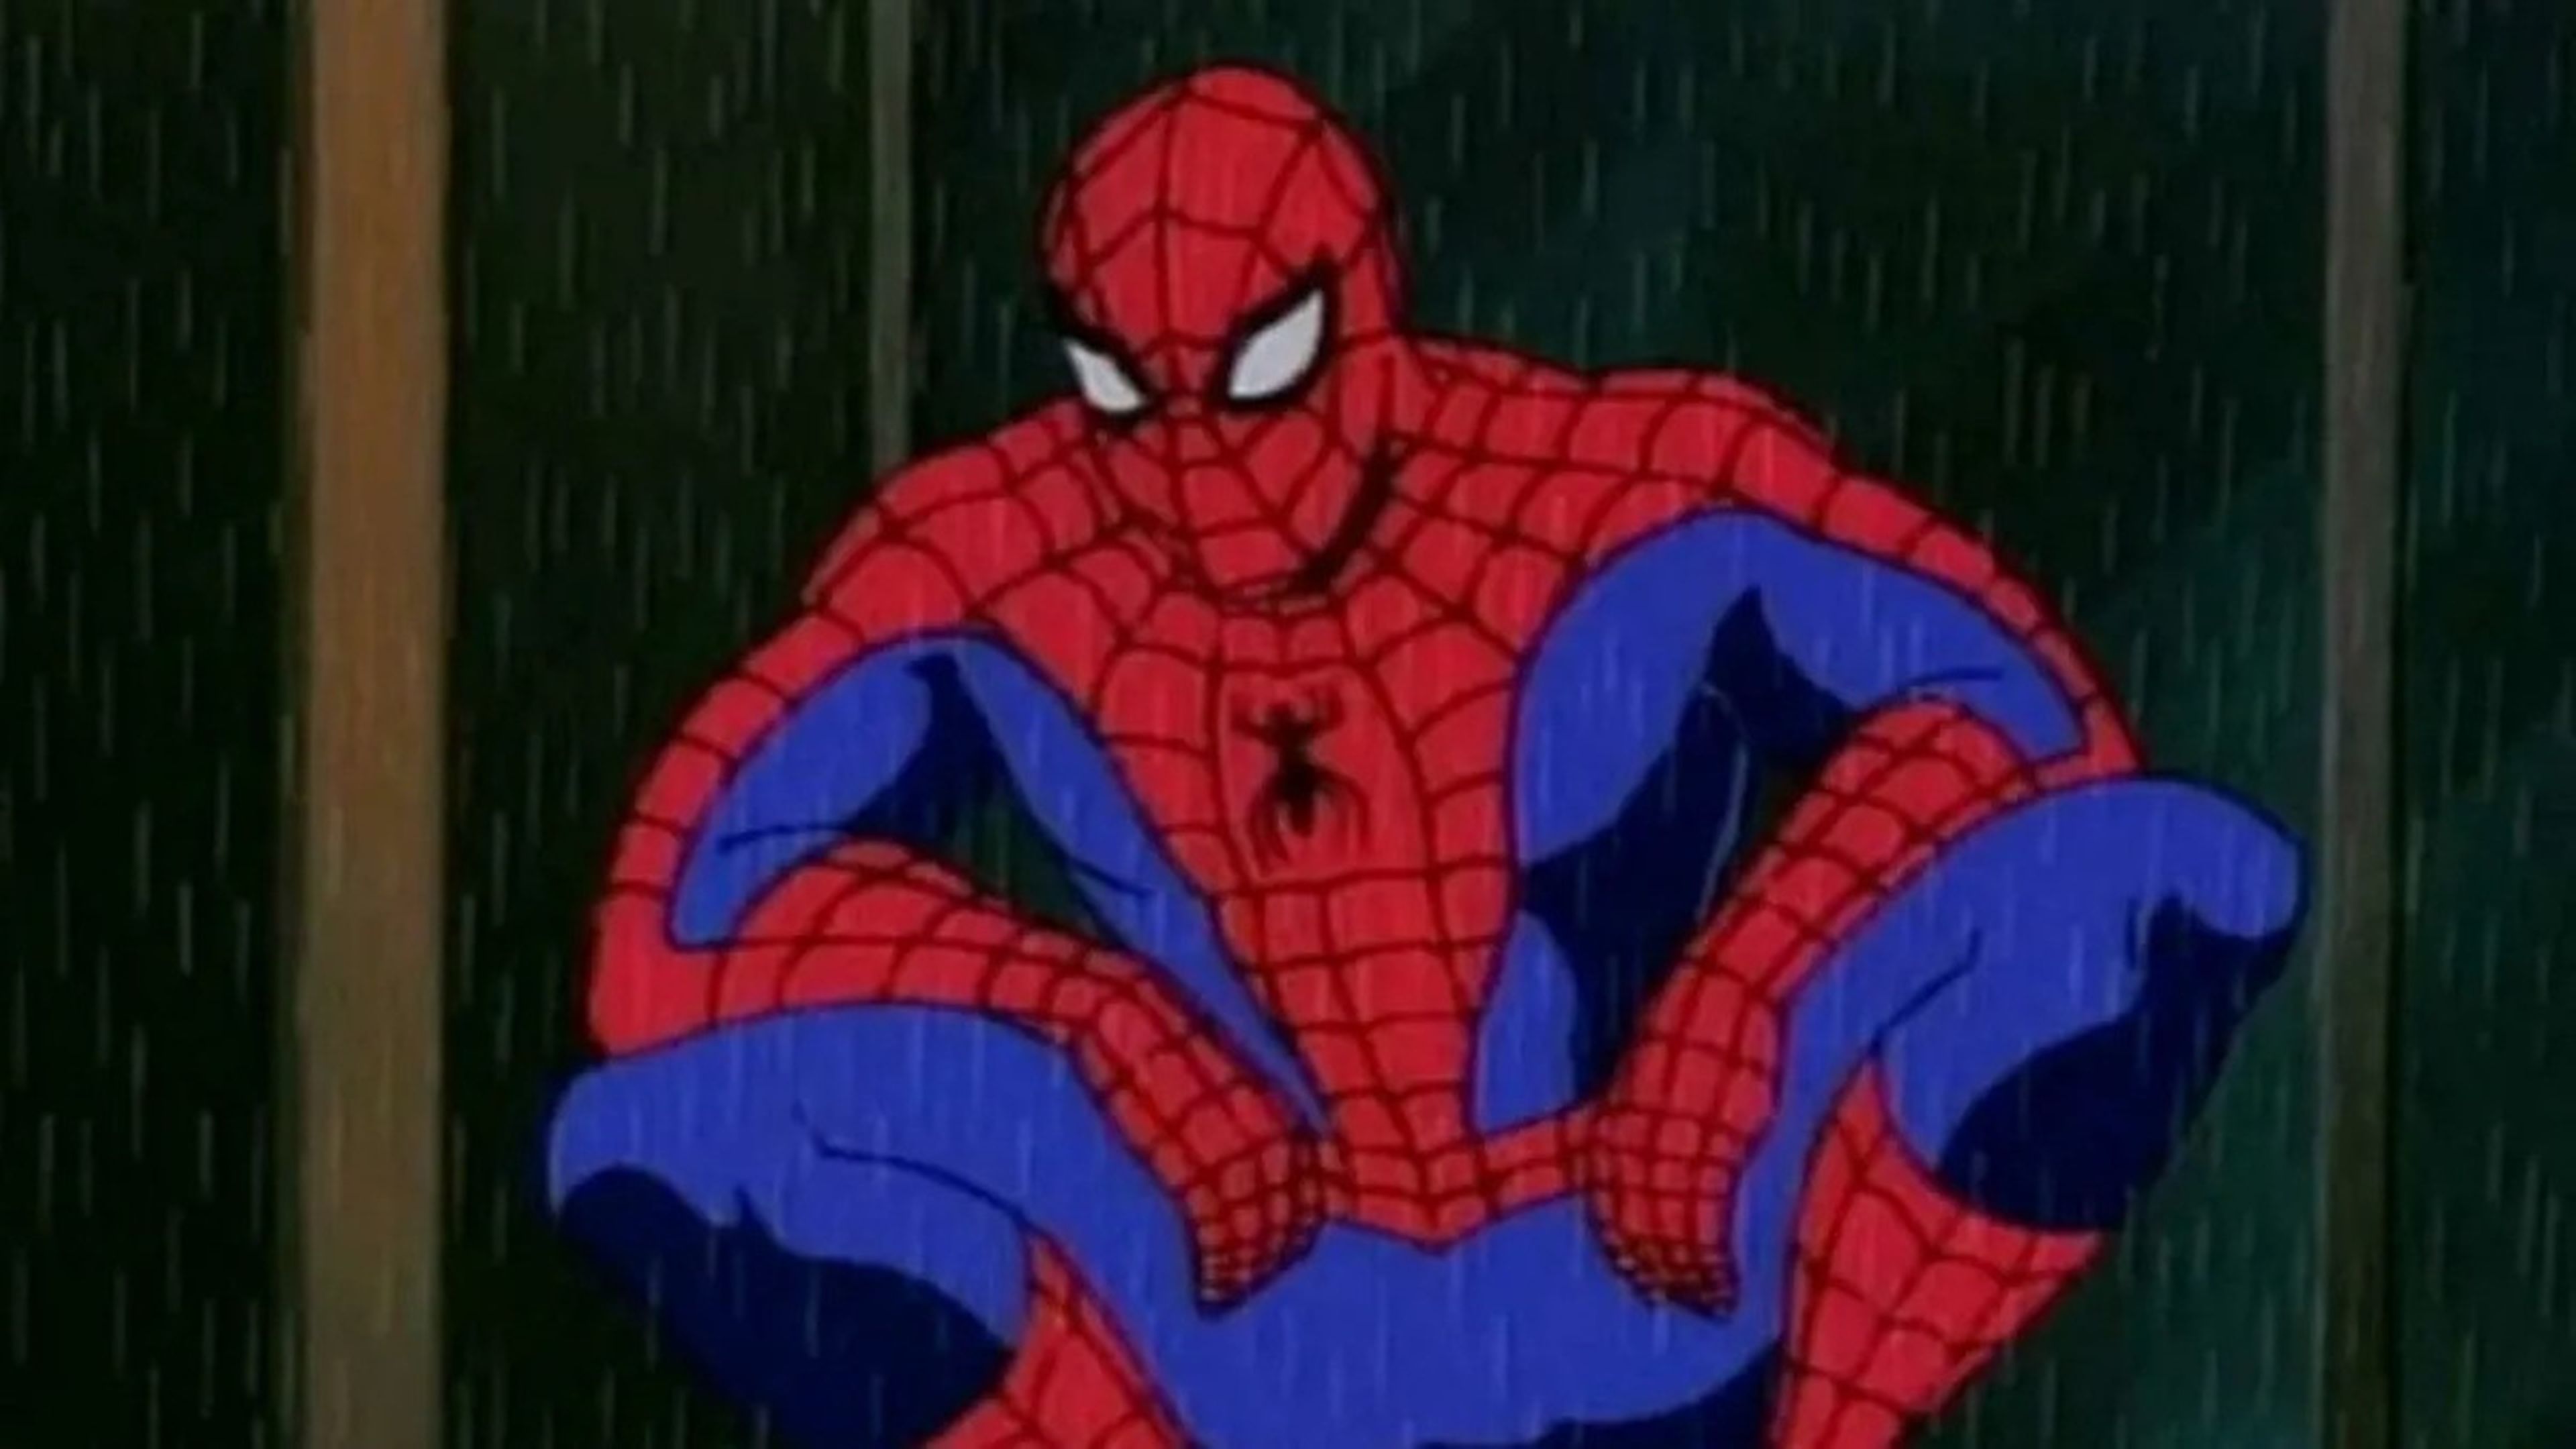 Spider-Man The Animated Series